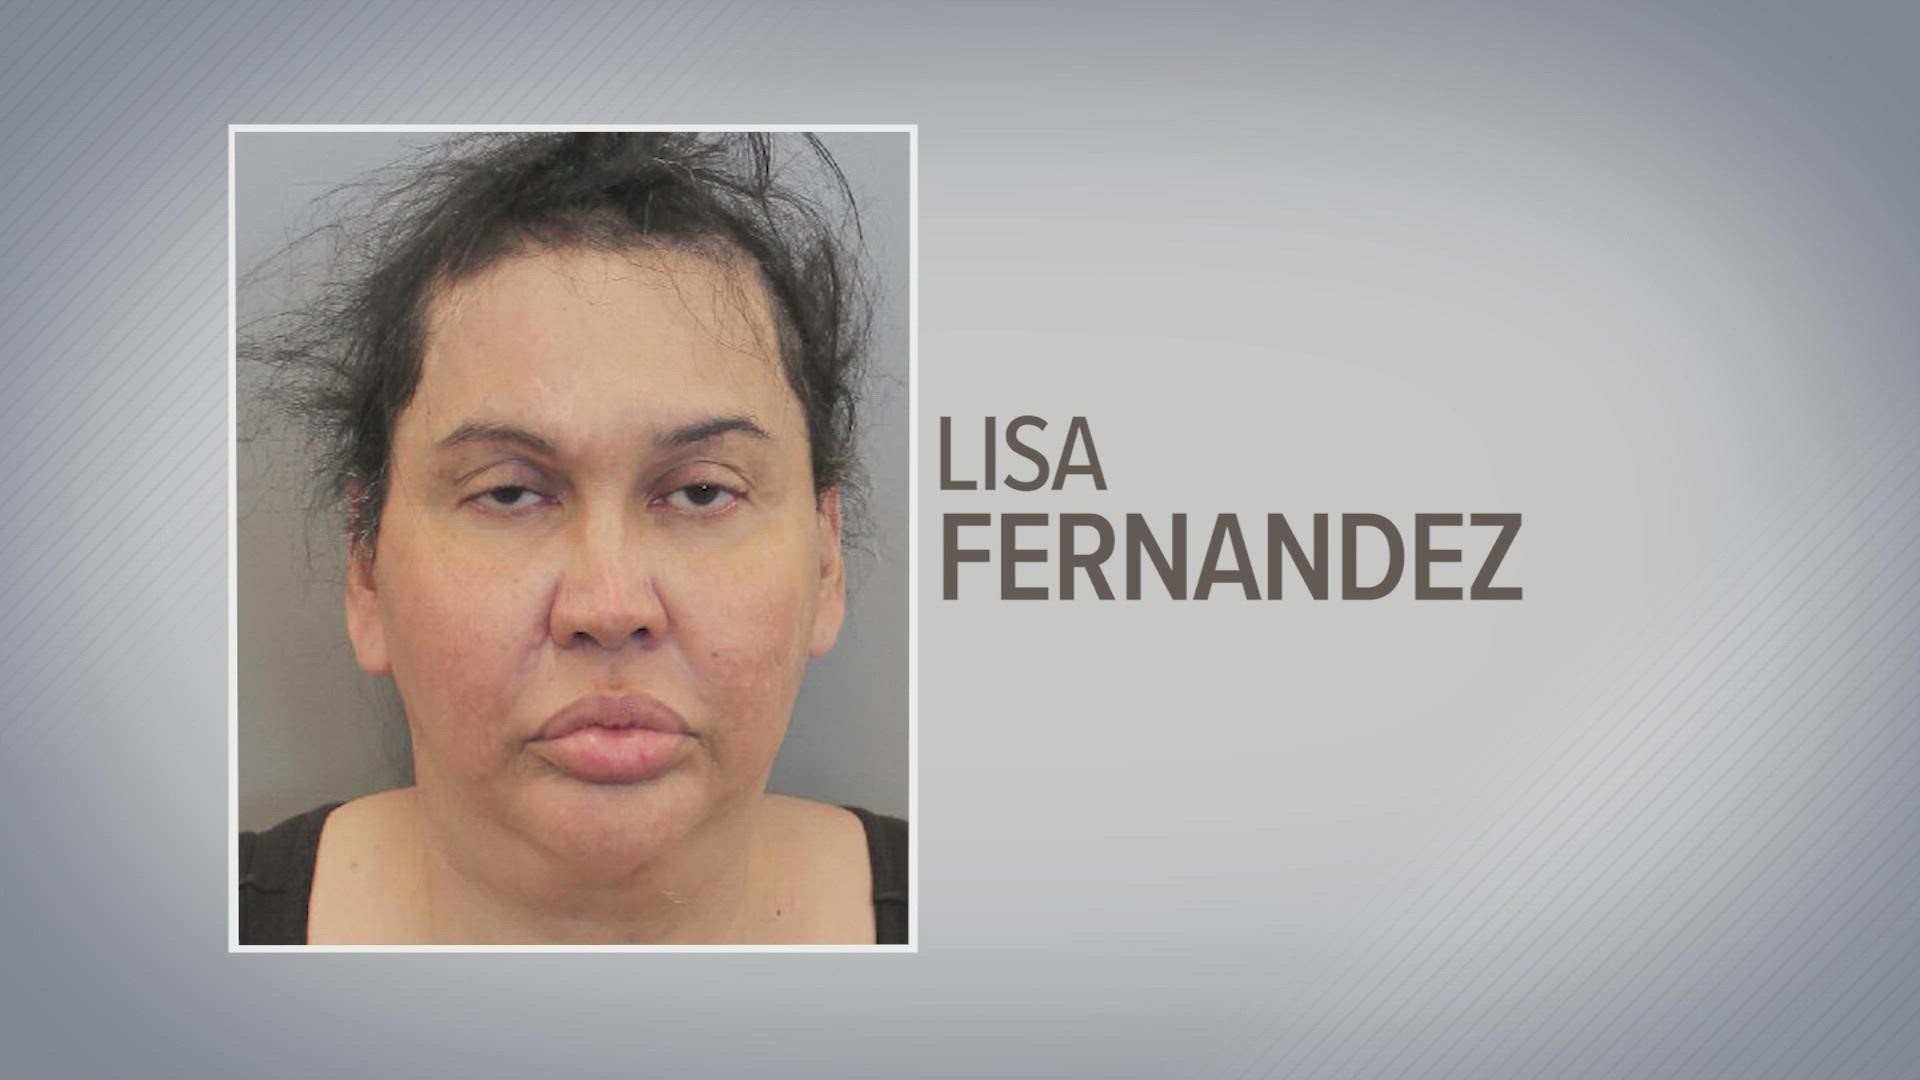 The victim had two injections from Lisa Hernandez, prosecutors say, but died from silicone pulmonary embolism after returning home to Missouri.